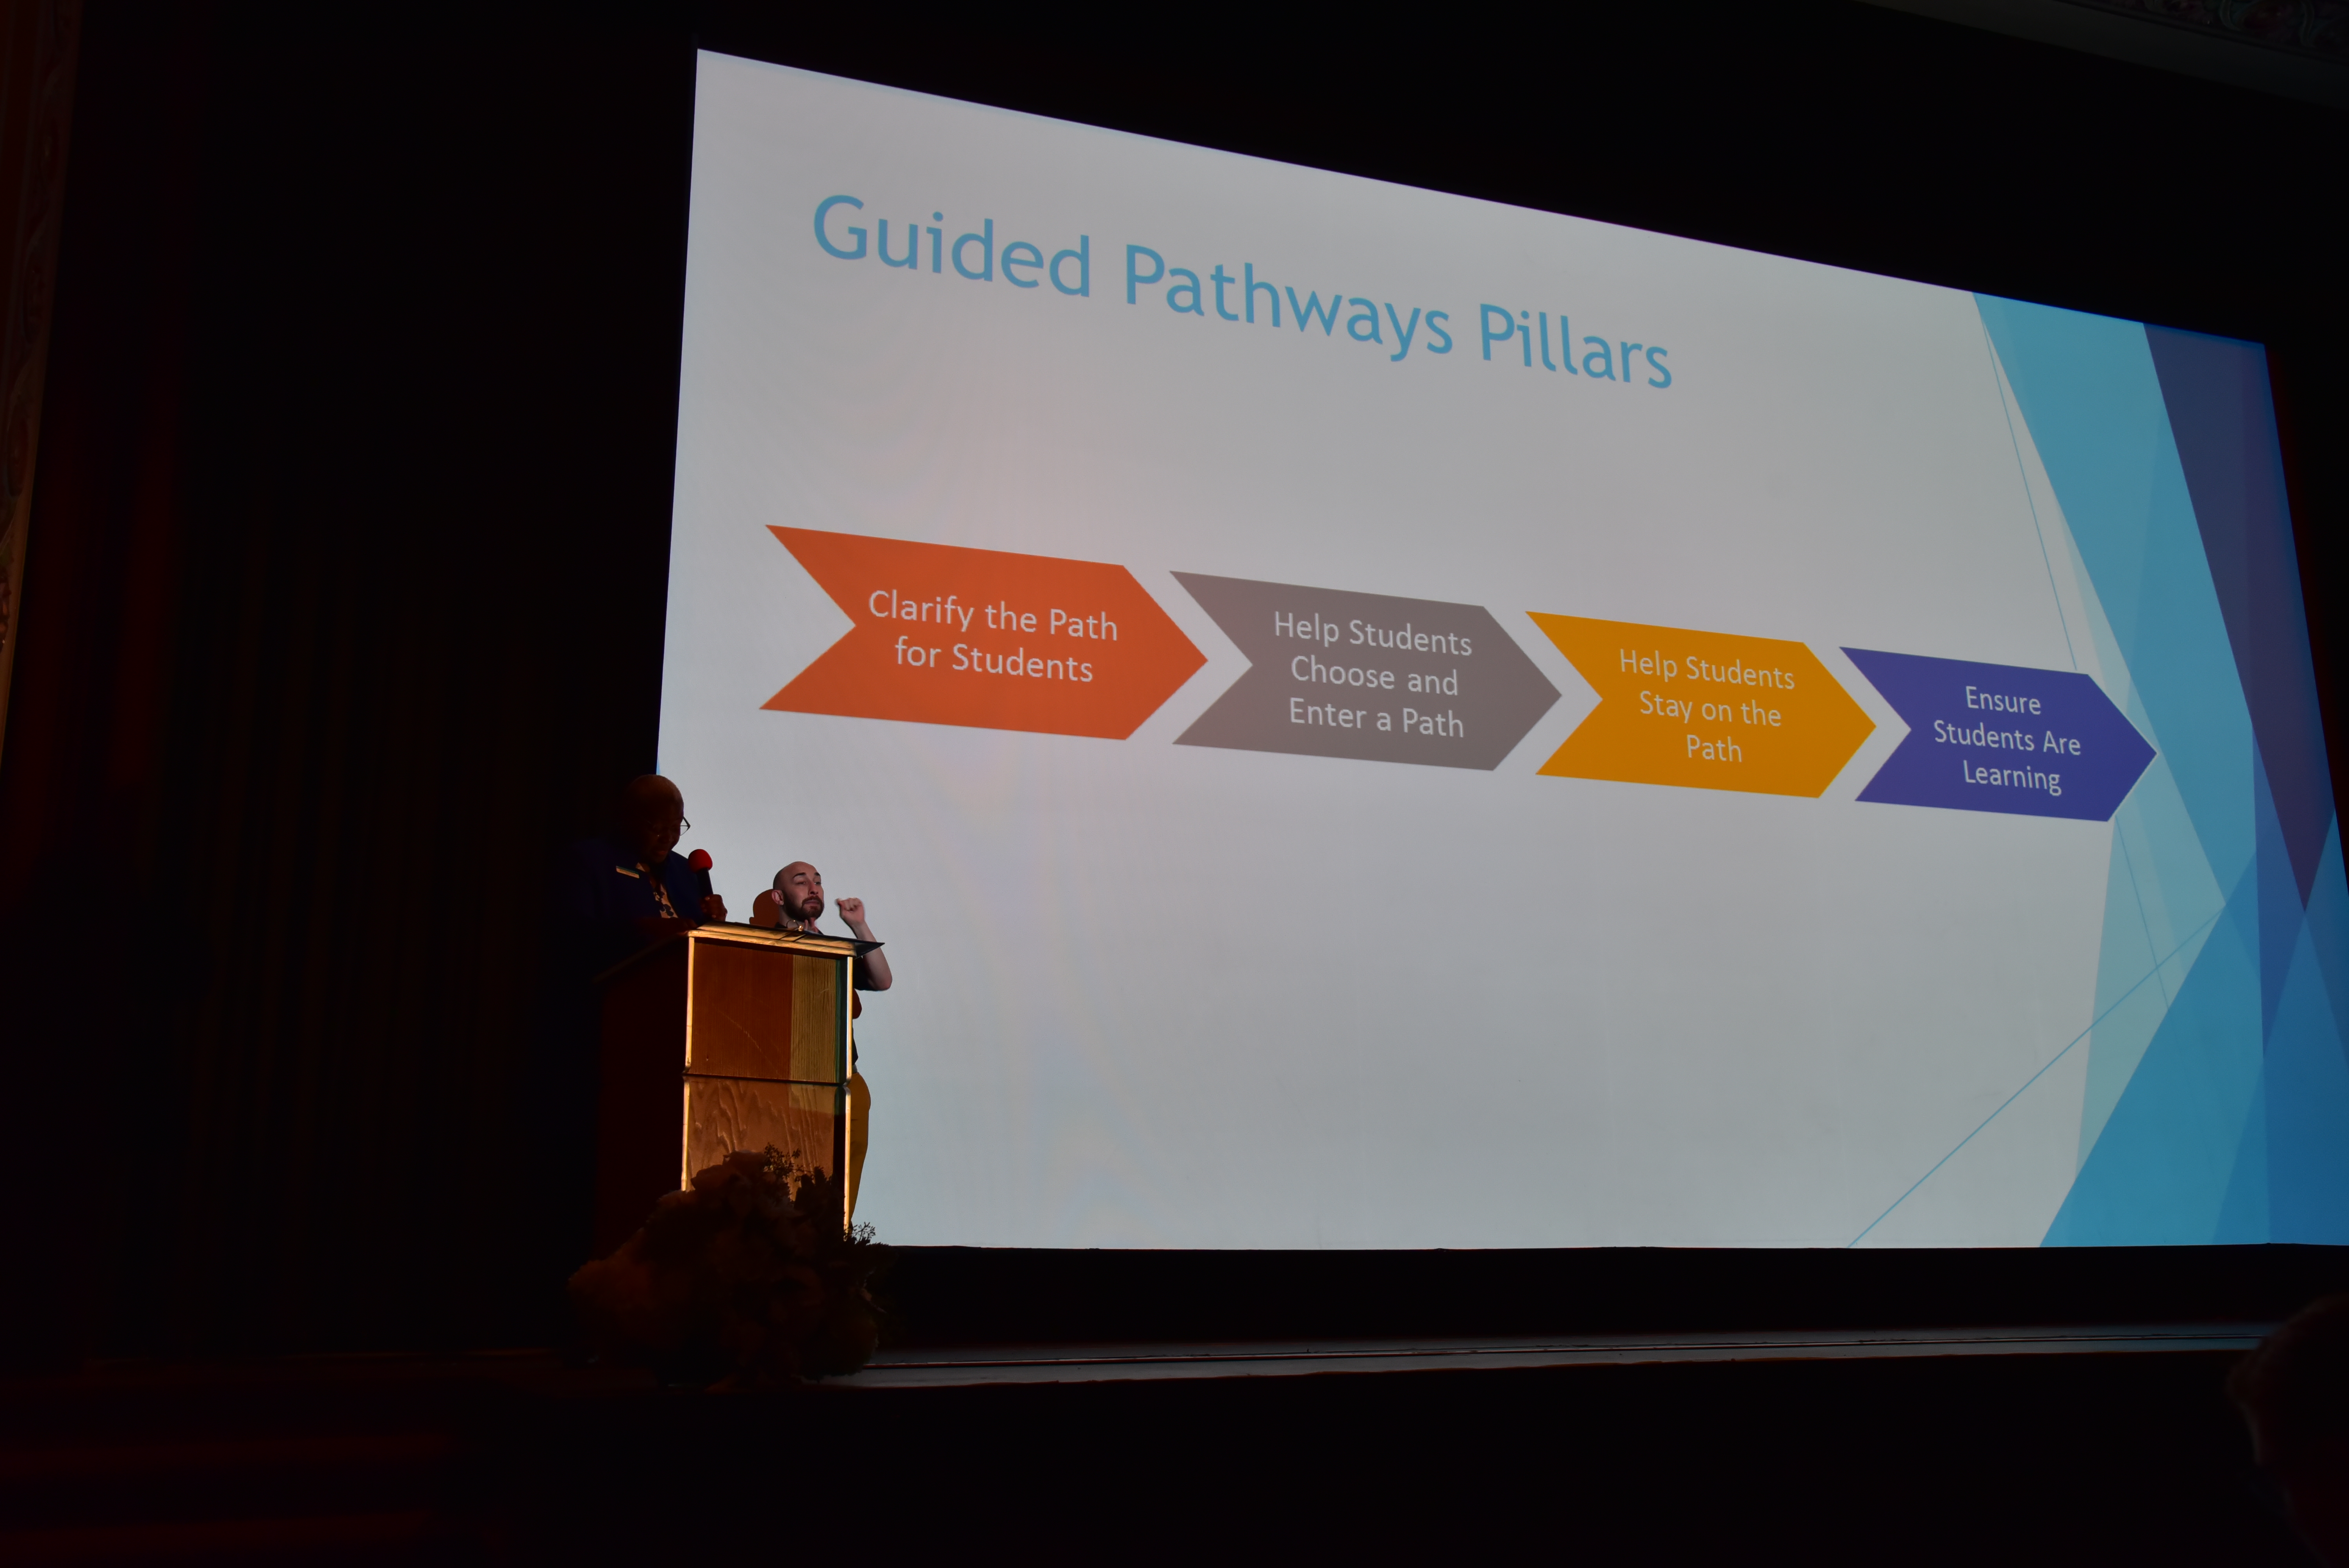 a stage image from the 2019 president's day, with a projected slide of the Guided Pathways pillars